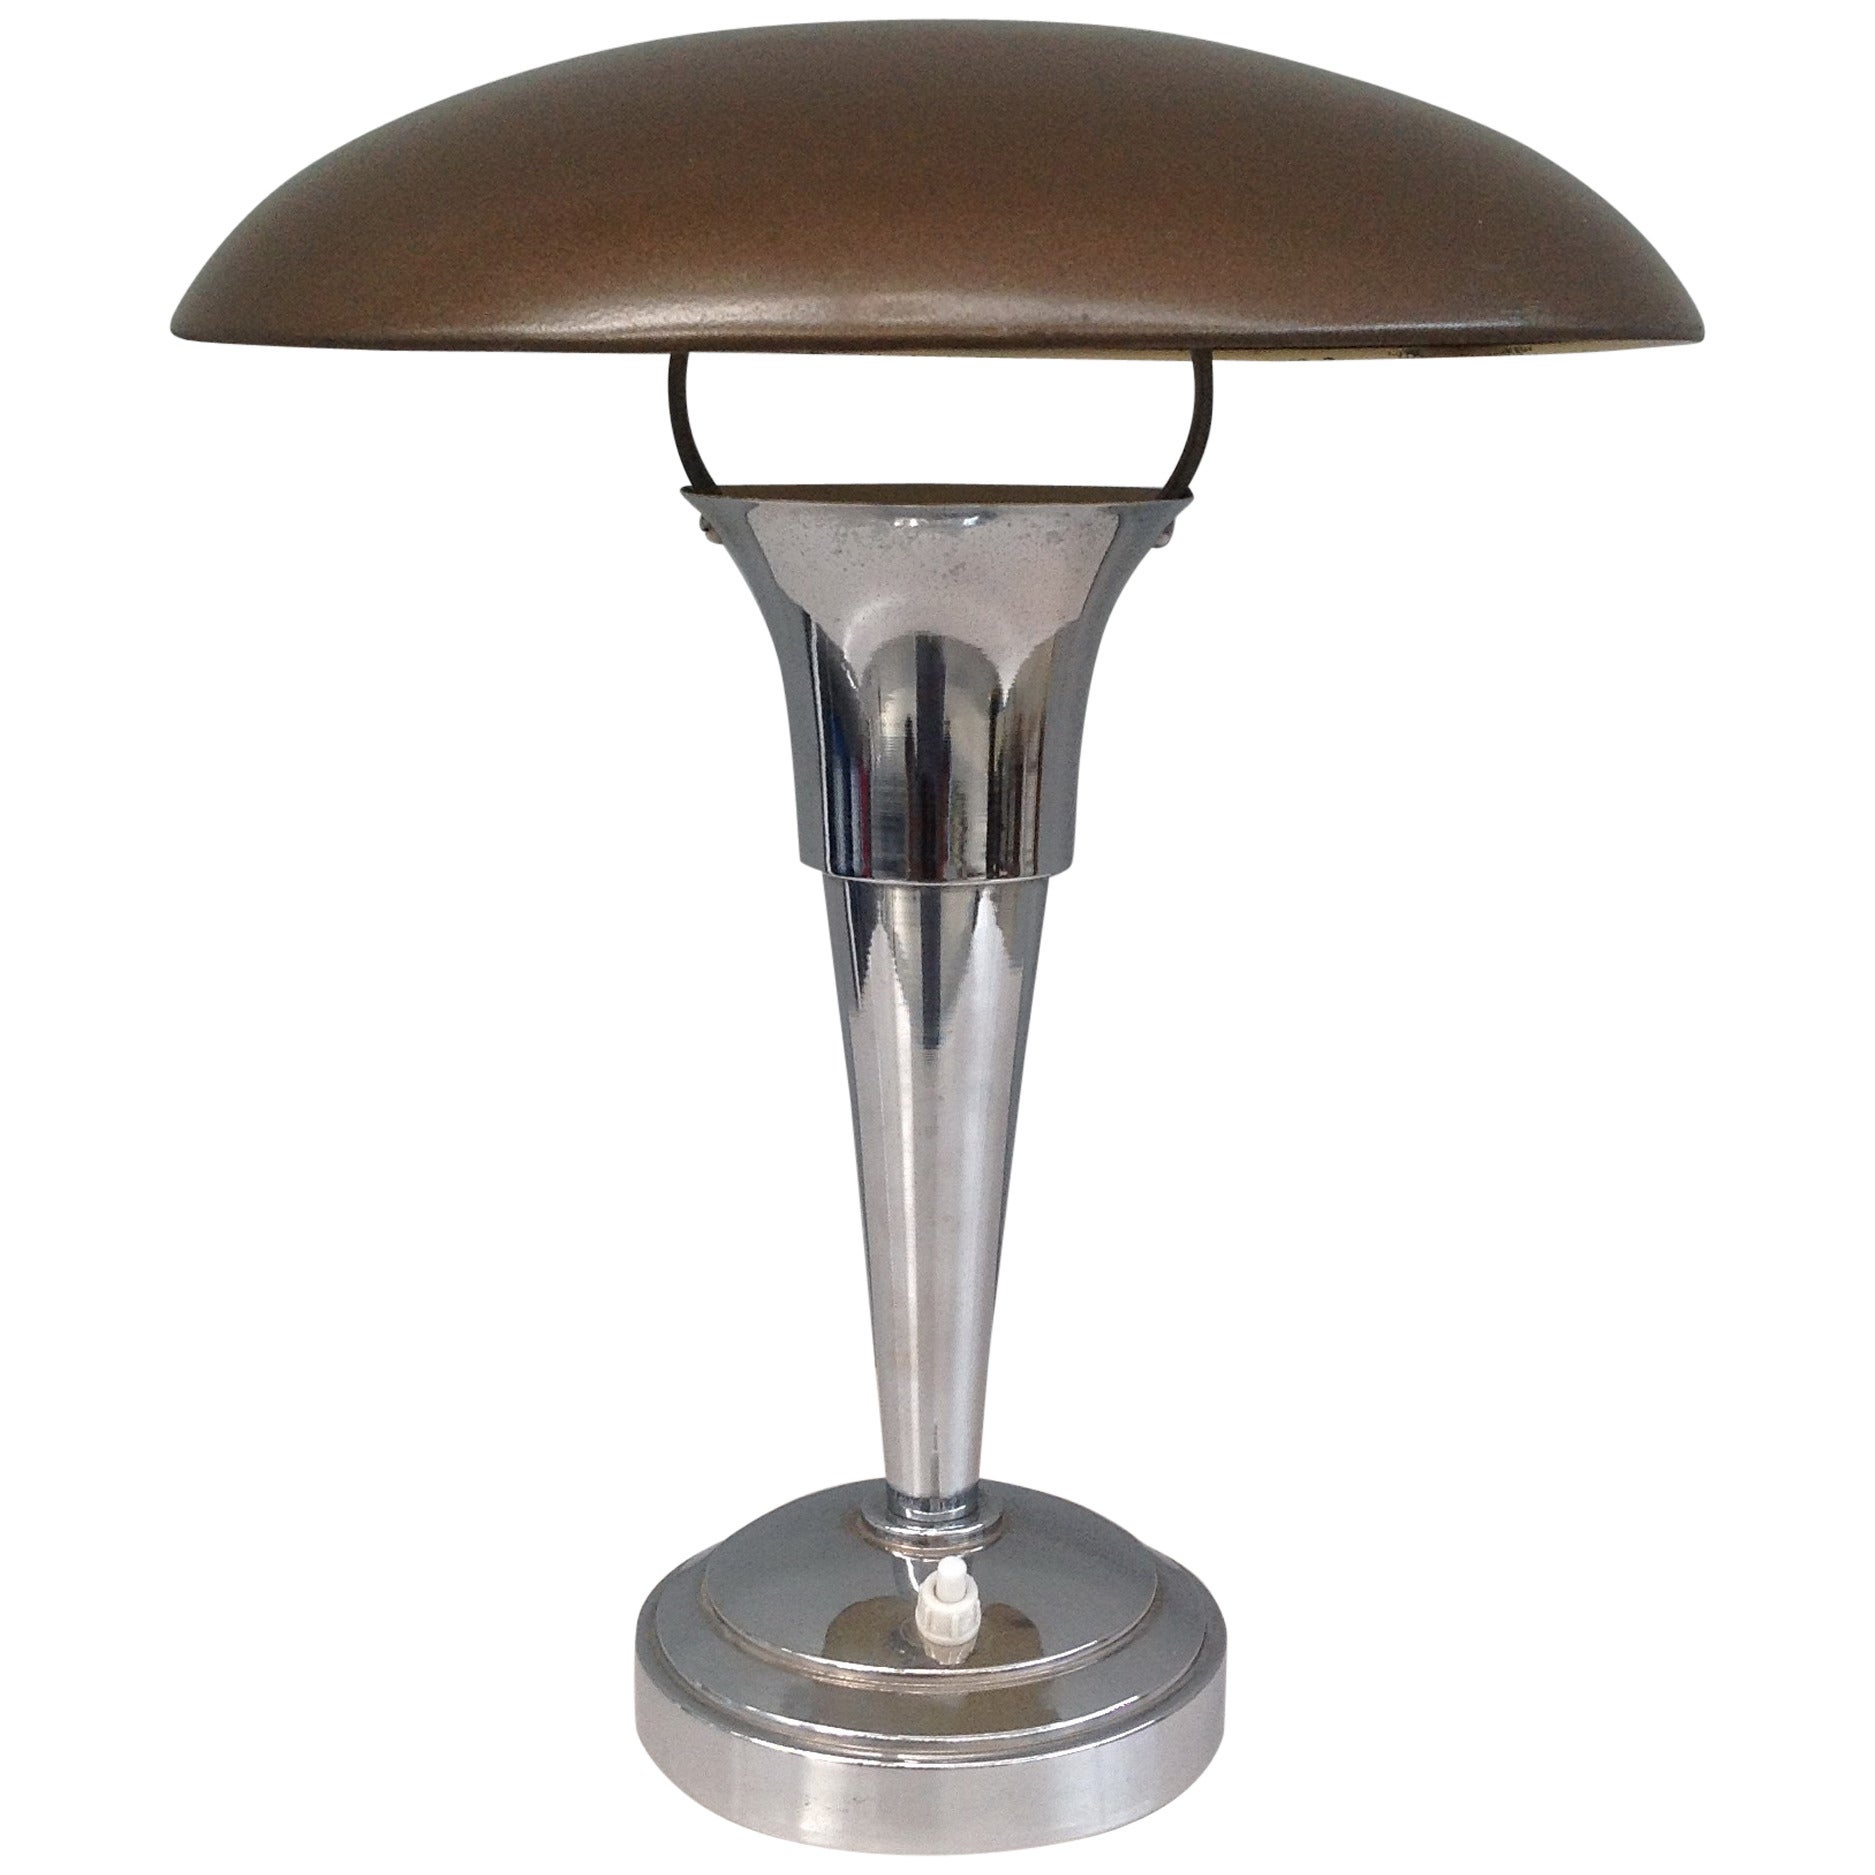 Chrome Lamp with Adjustable Top